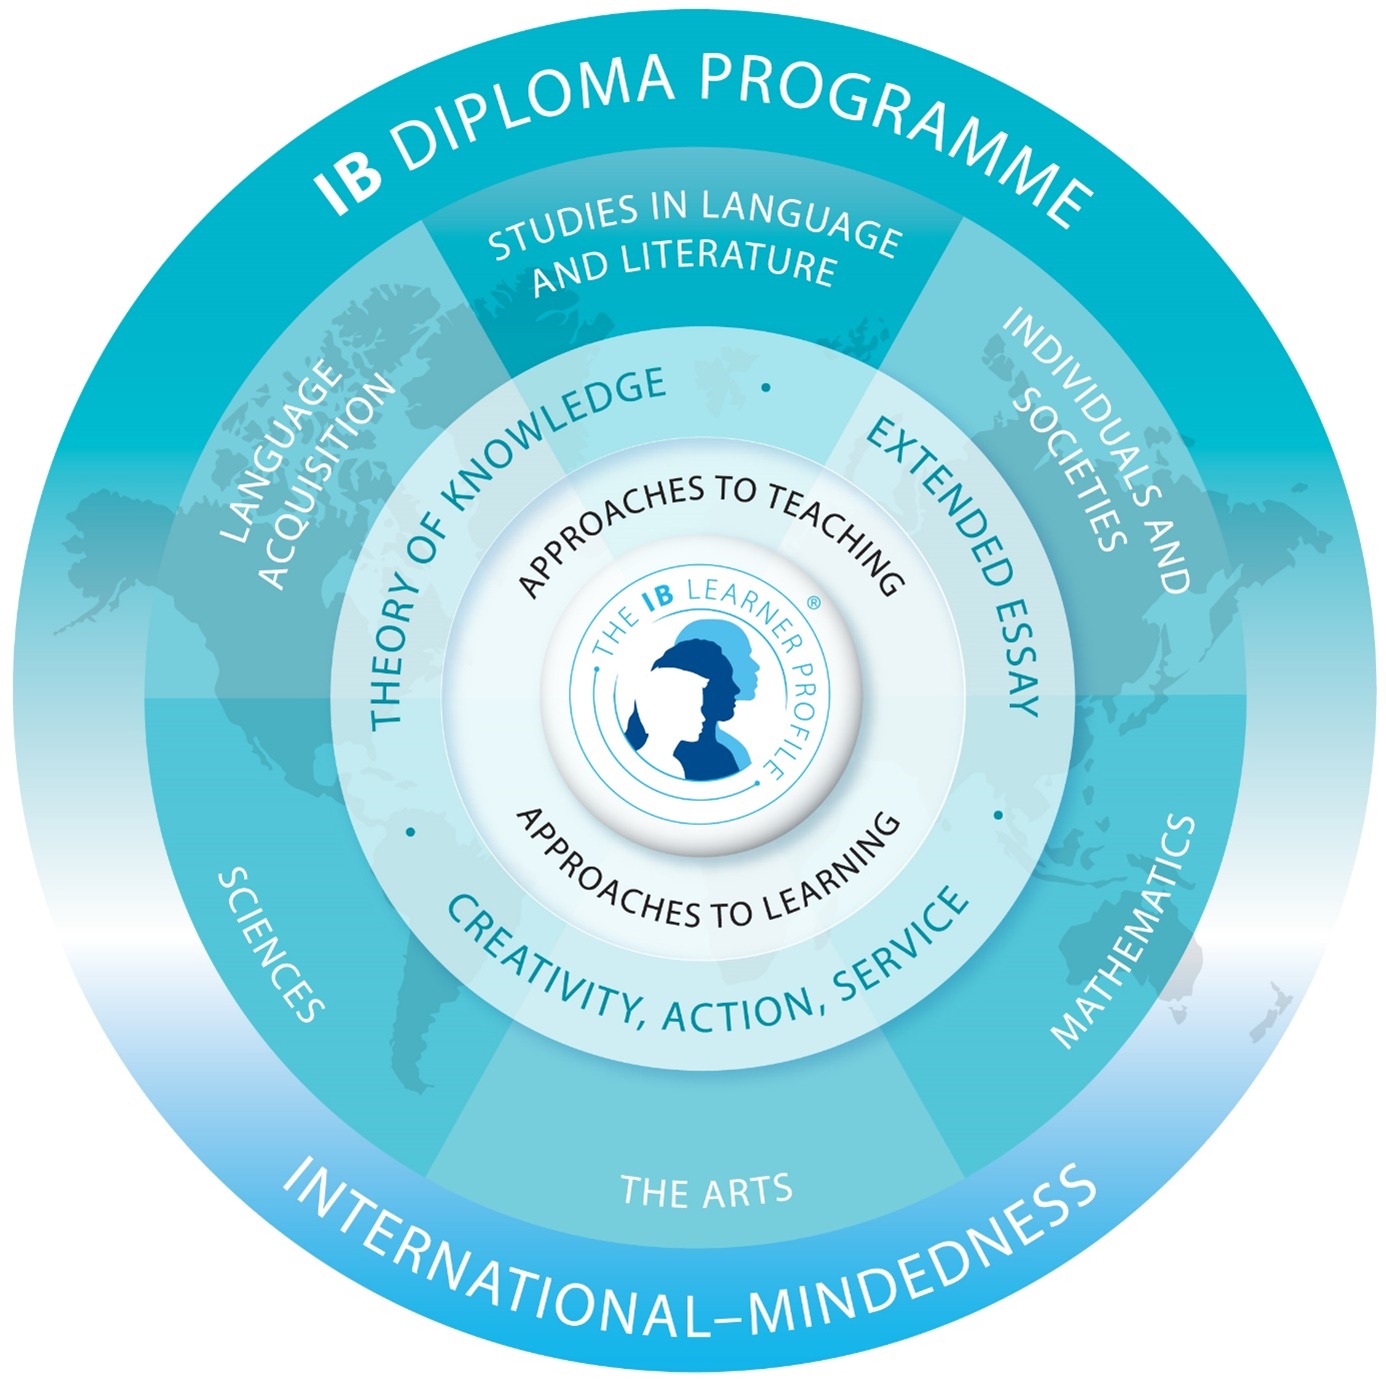 The curriculum of IB Diploma Programme